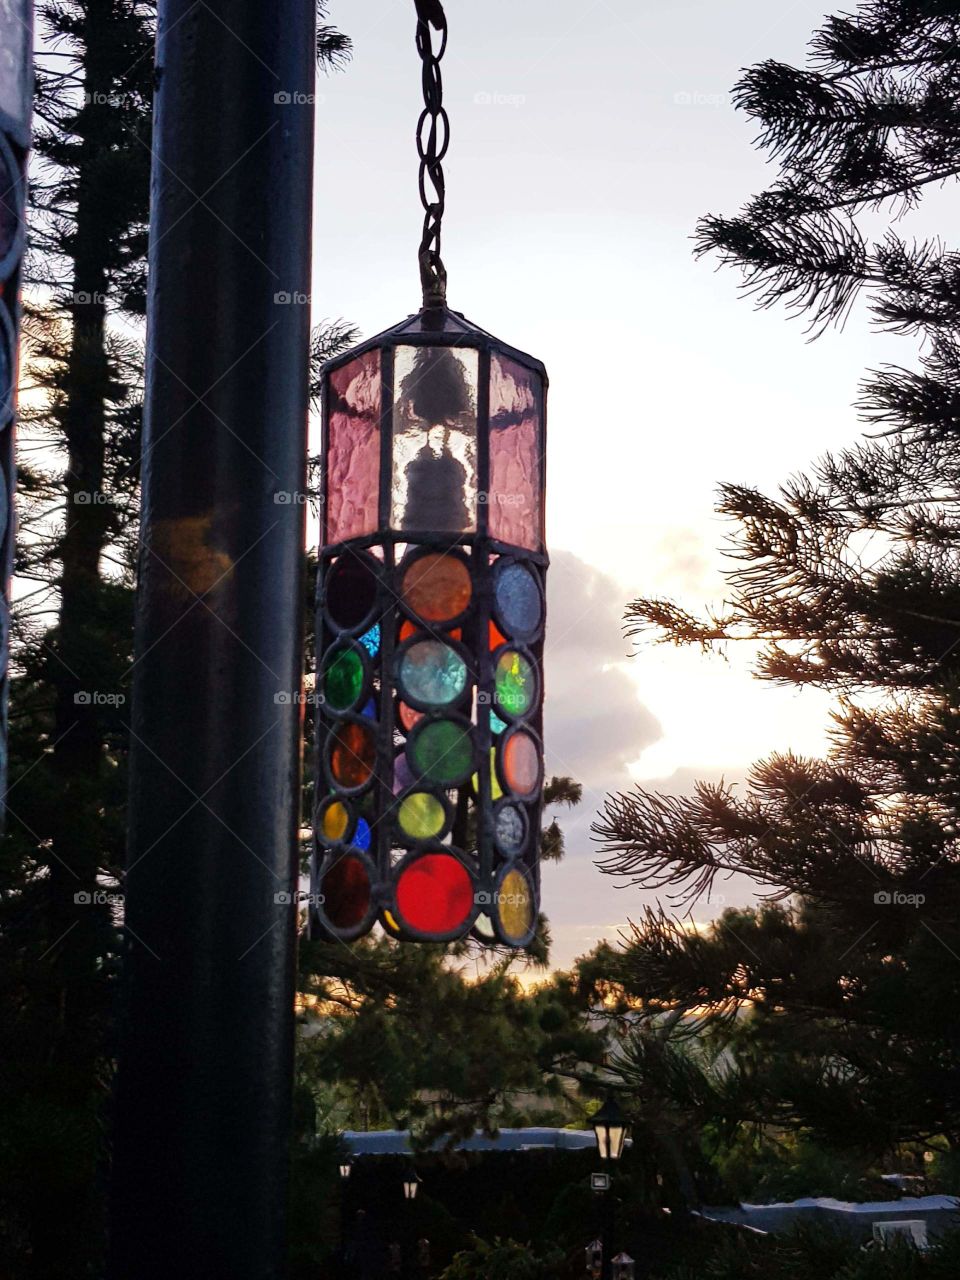 Colorful lantern hanging outside with leaves and branches of trees as background.